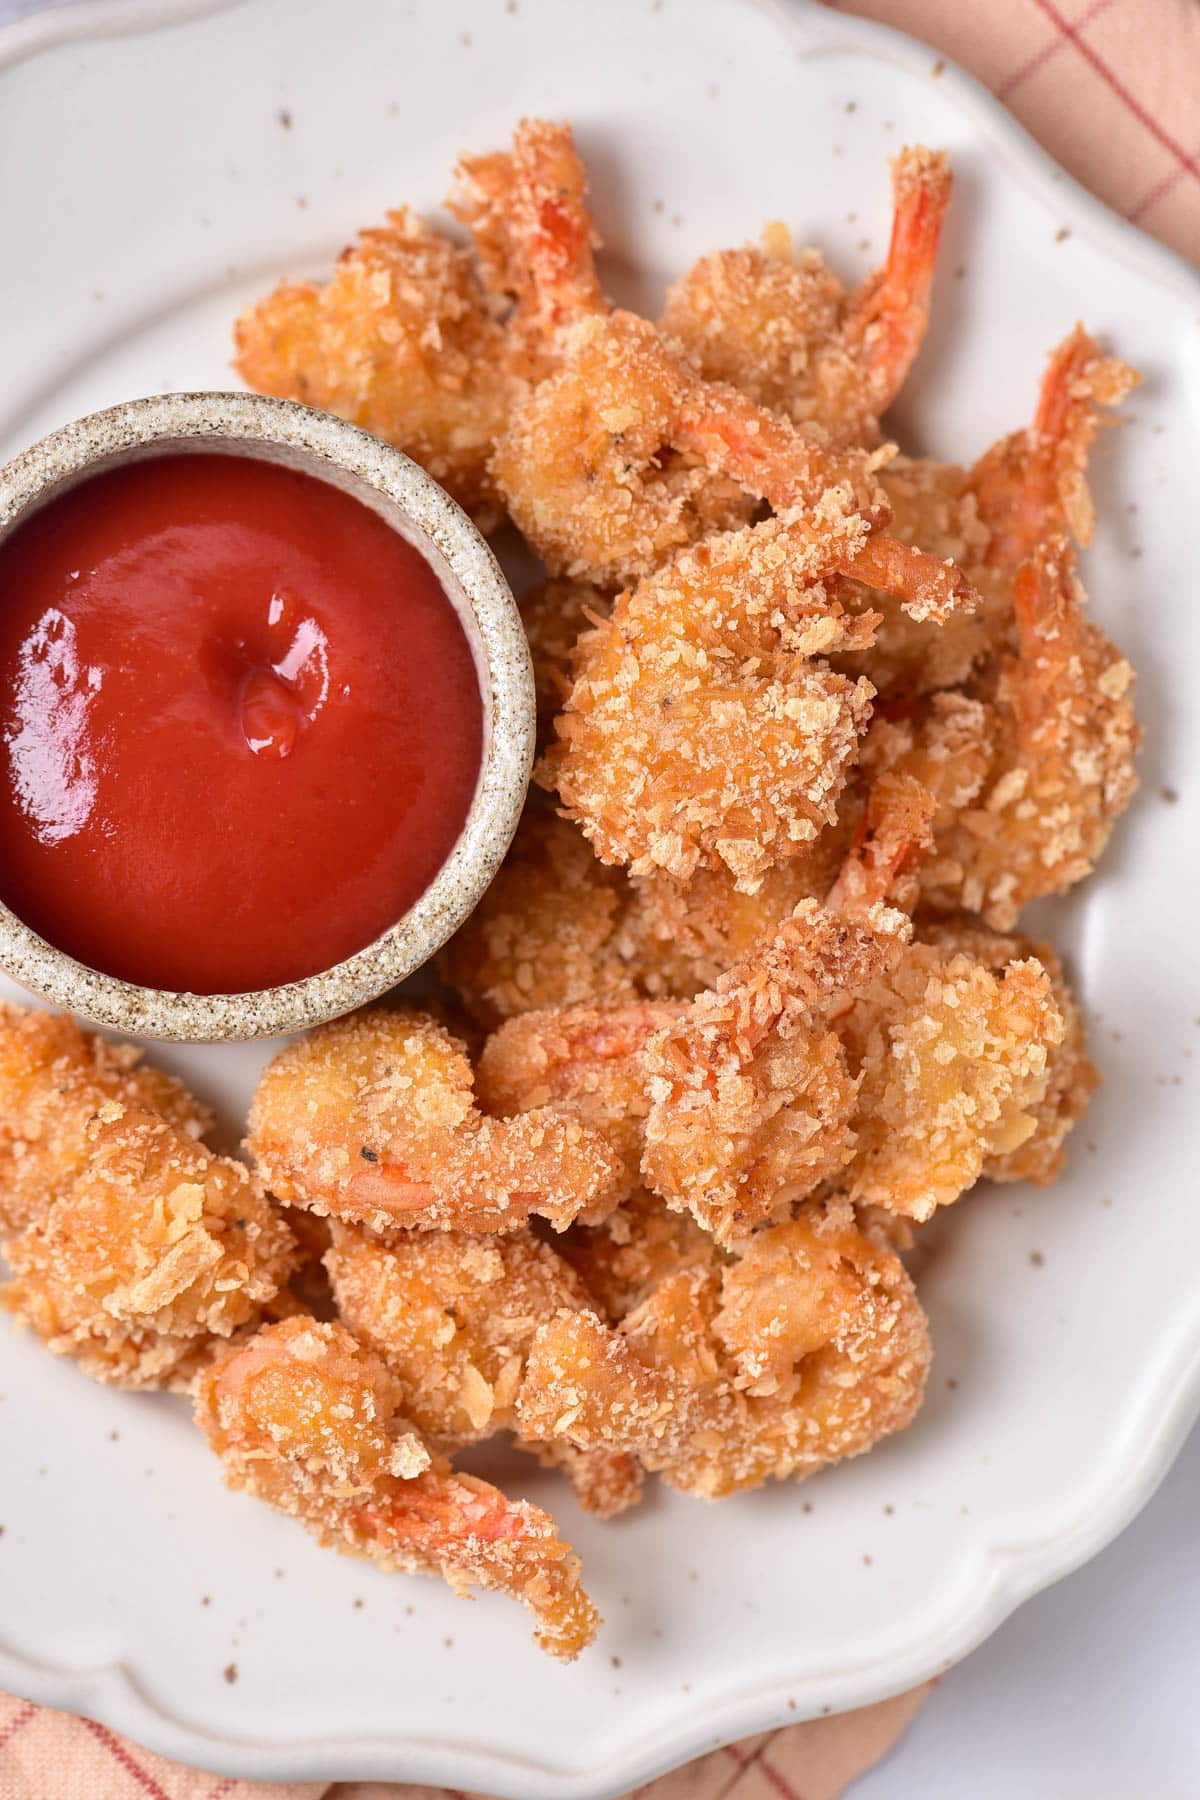 Coconut shrimp with red dipping sauce on a white speckled plate